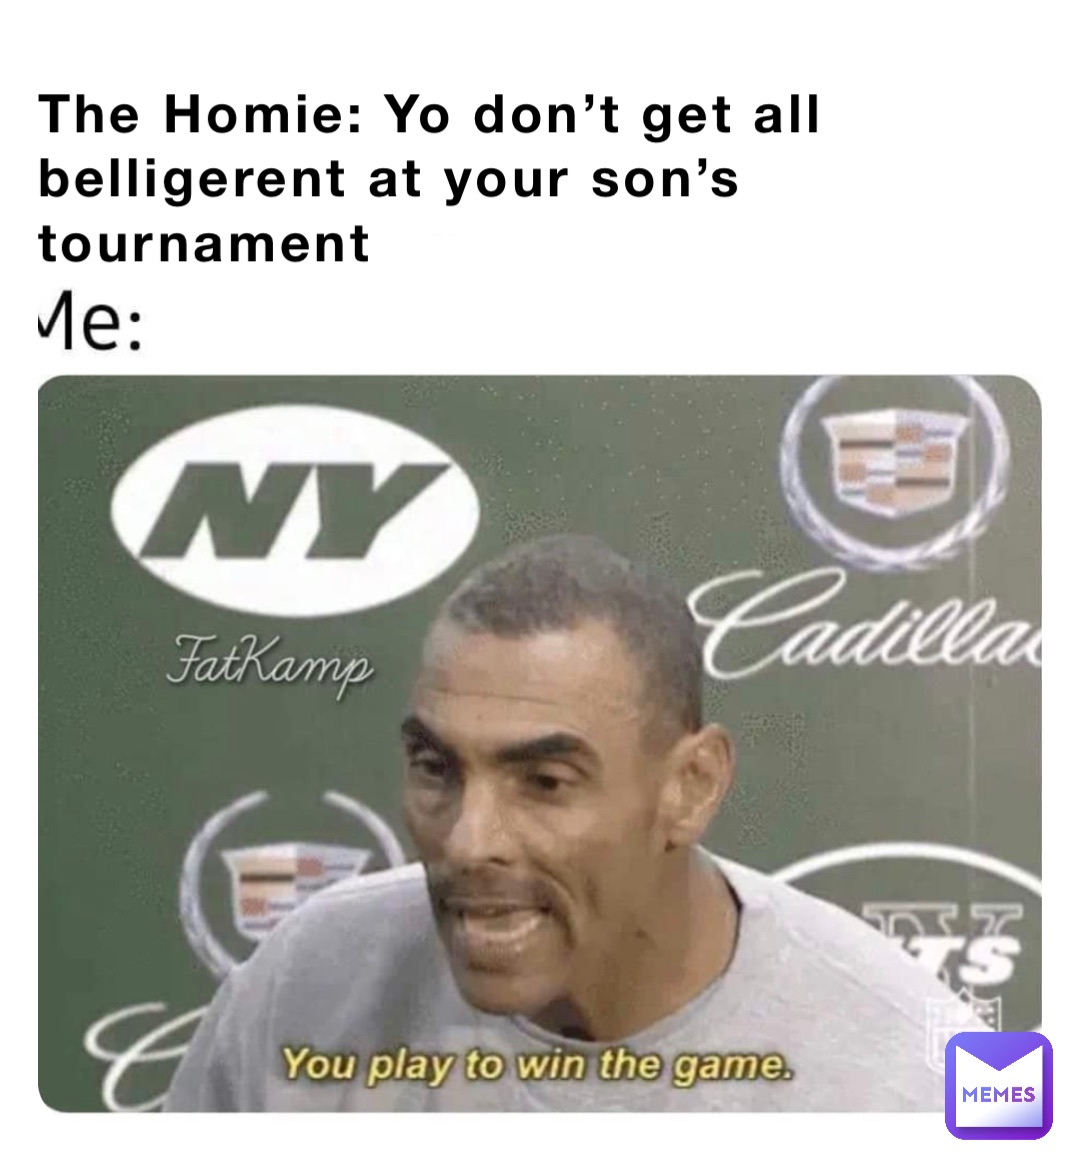 The Homie: Yo don’t get all belligerent at your son’s tournament